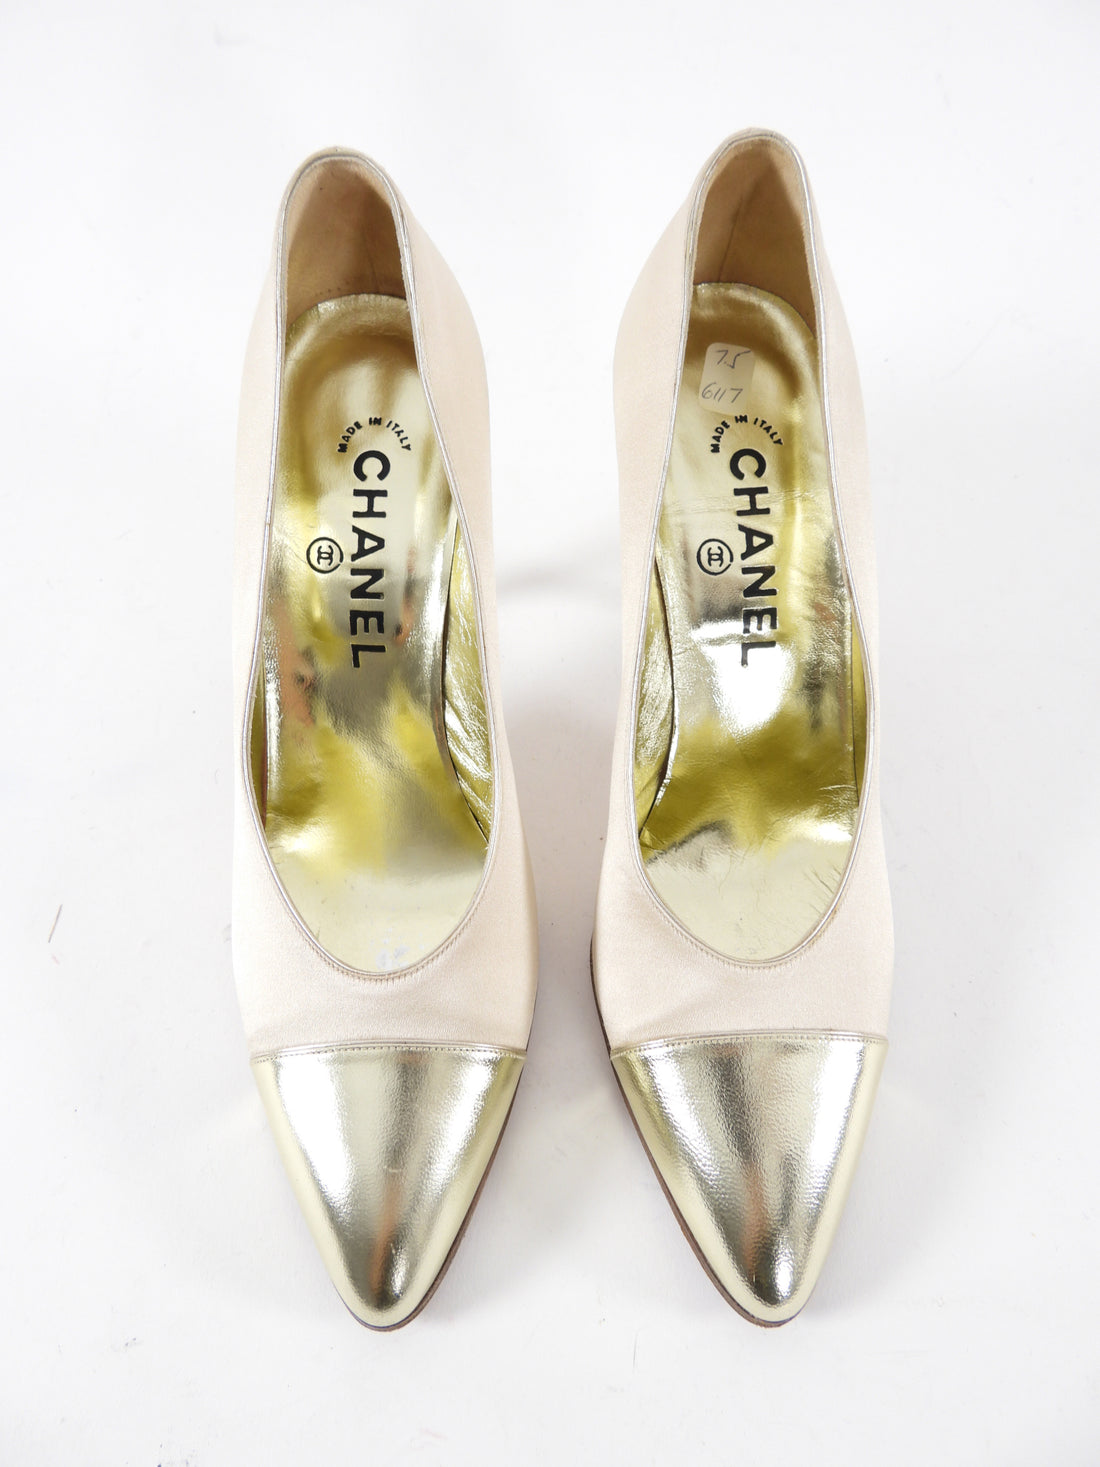 Chanel 1980's Satin and Gold Leather Classic Pumps - 7.5